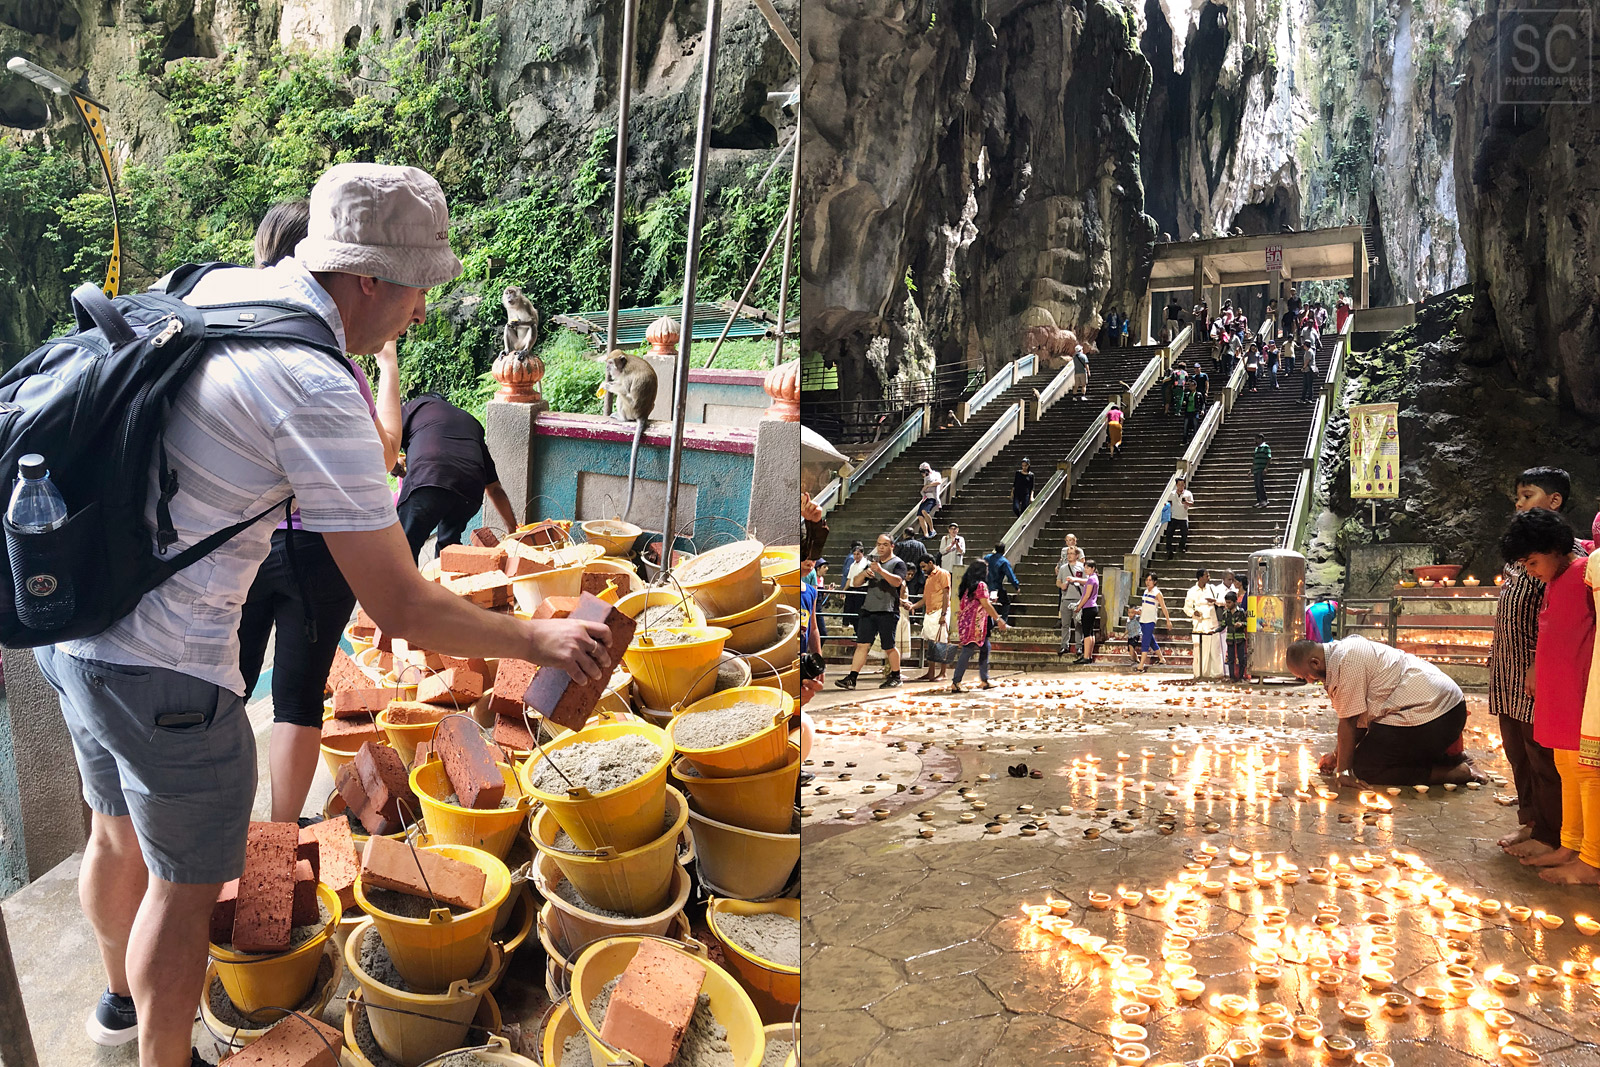 They encourage all visitors to carry a brick or a bucket of sand to the top of the stairs to help with the construction of the temple inside the caves